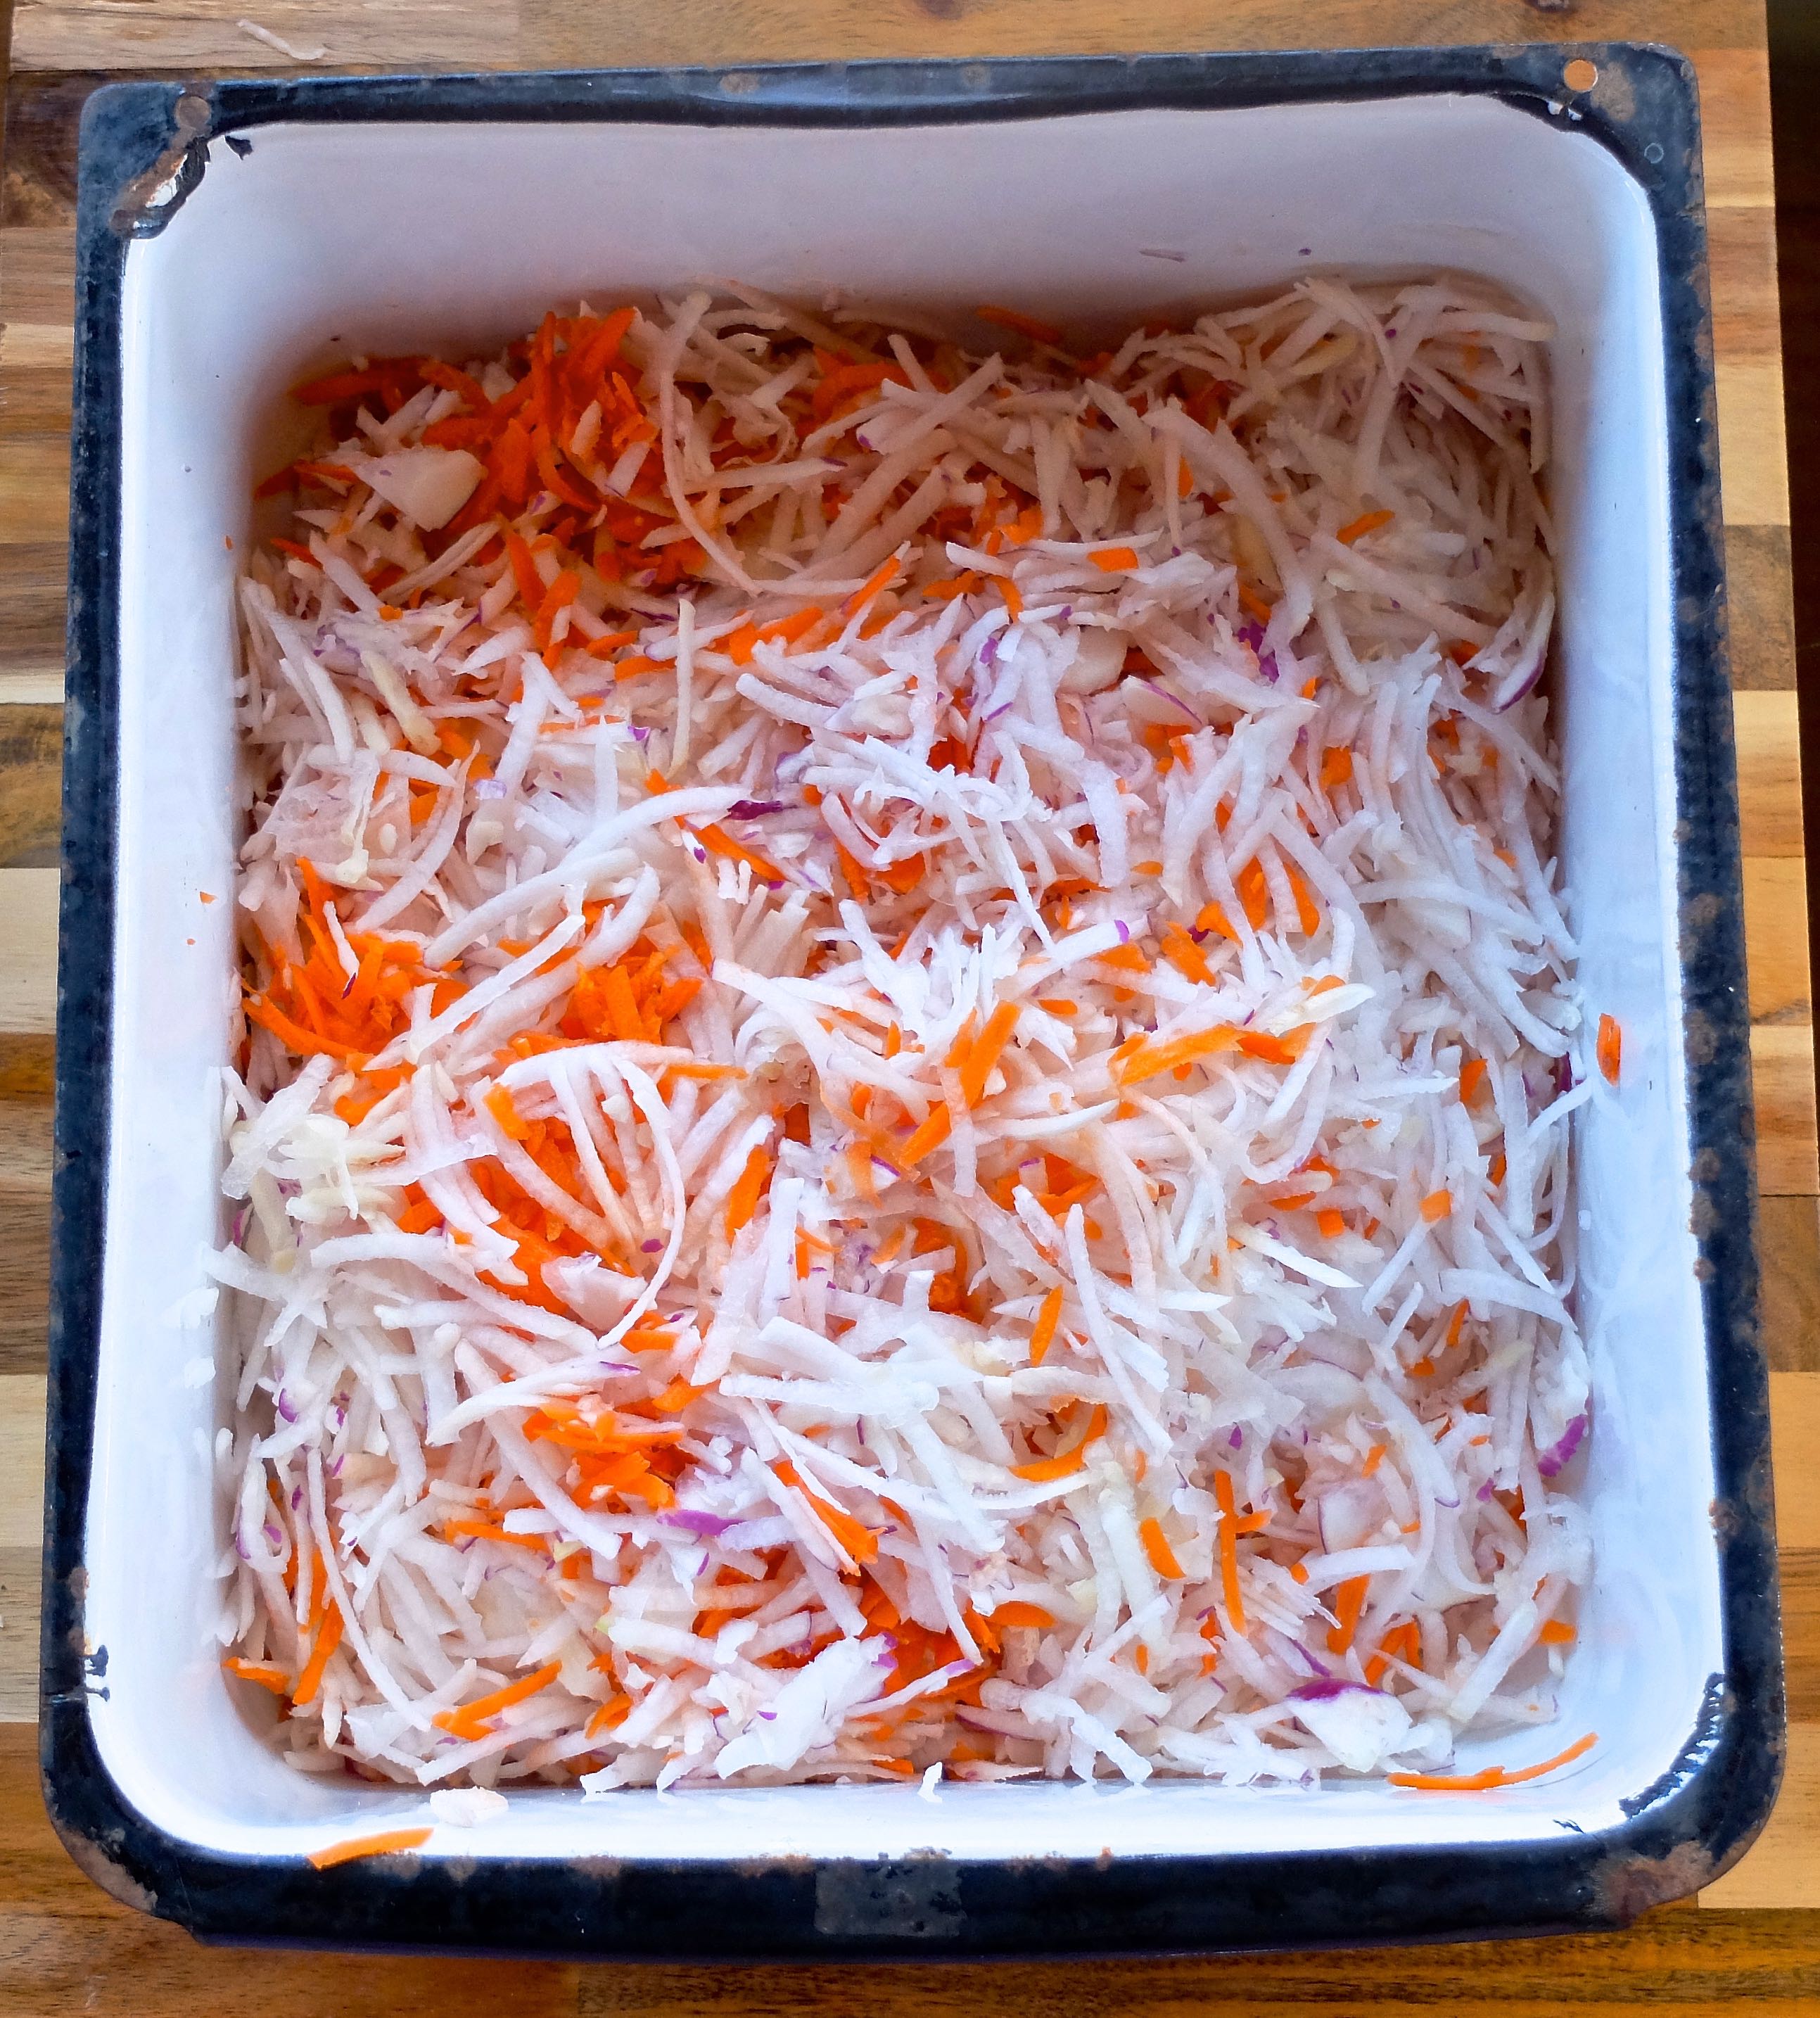 Using a box grater or food processor, shred the vegetables and place in a non-reactive pan. I used carrots and turnips for this batch. 